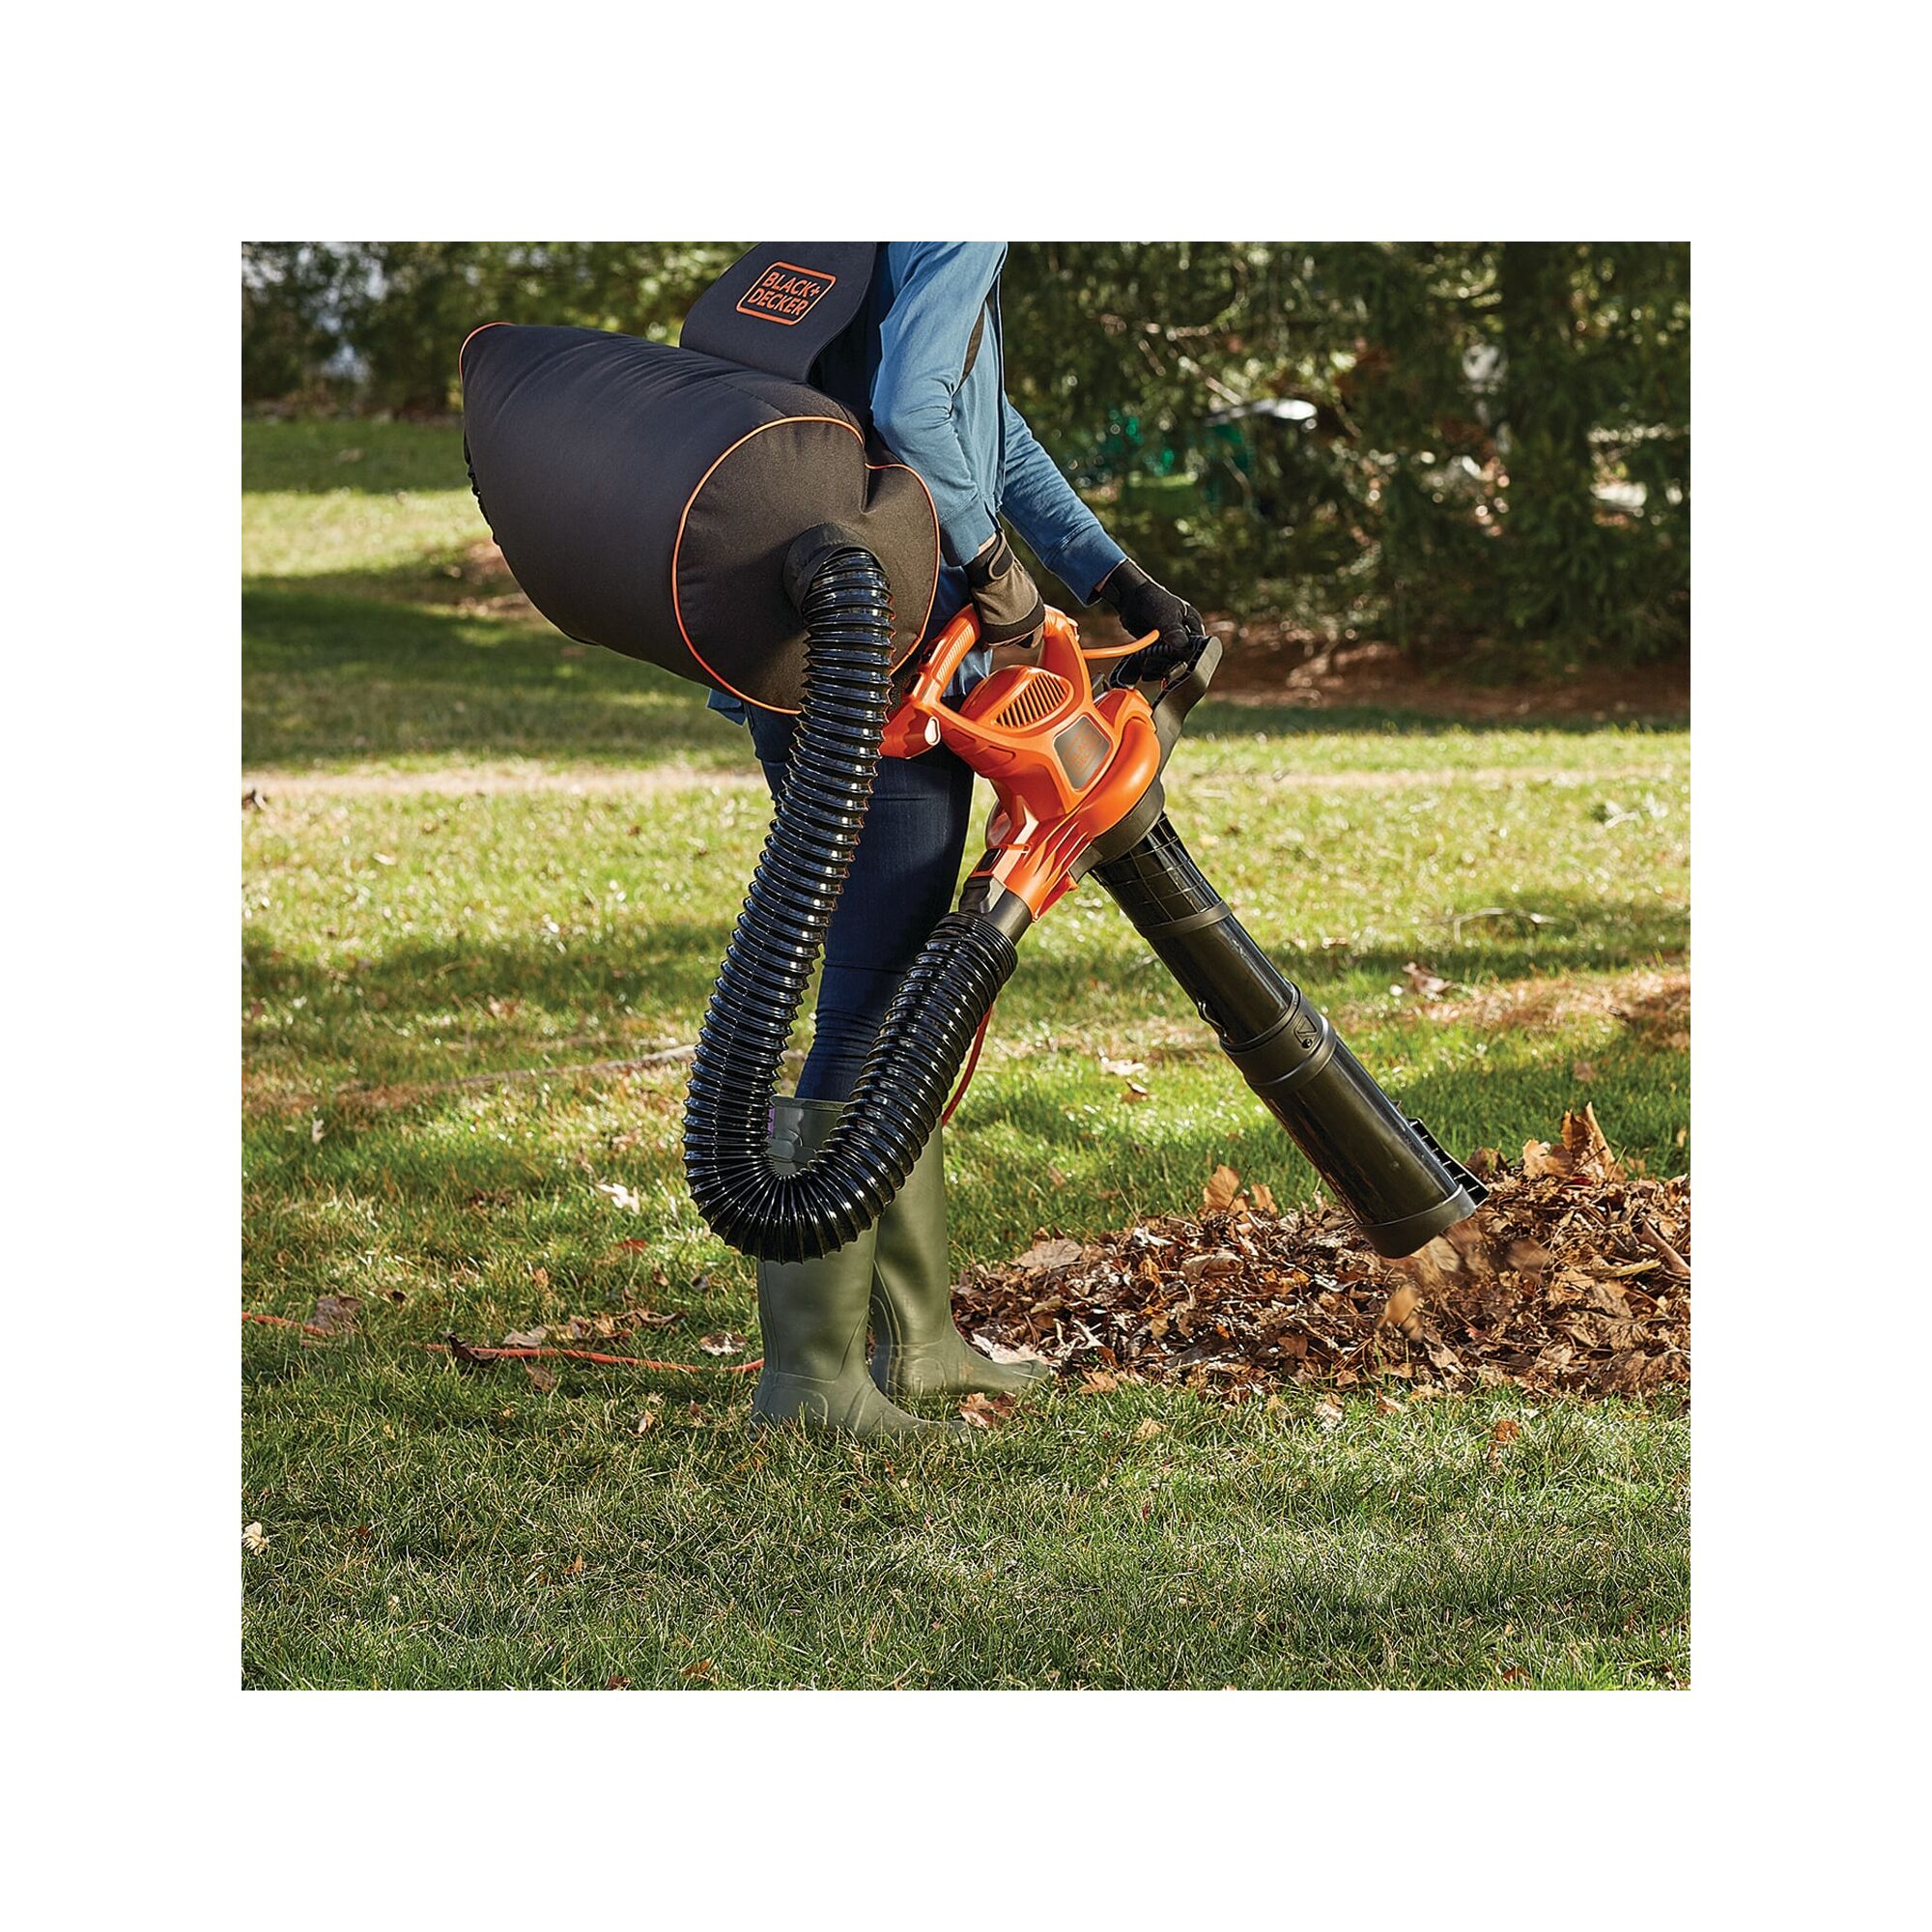 3 in 1 VAC PACK being used by person to collect dry leaves from park.